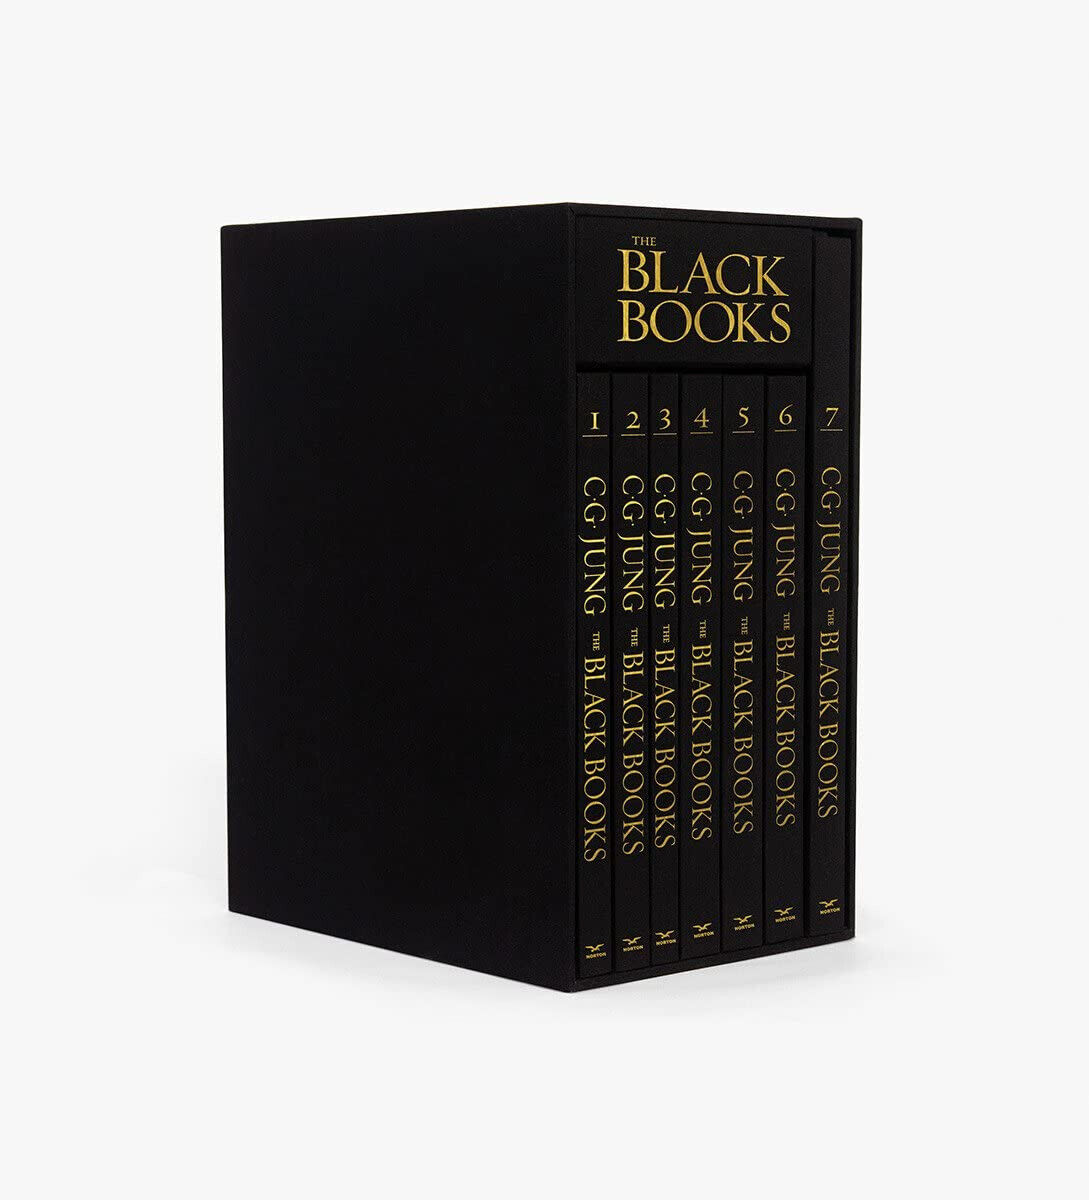 The Black Books: 1913-1932, Notebooks of Transformation - C. G. Jung - 2020